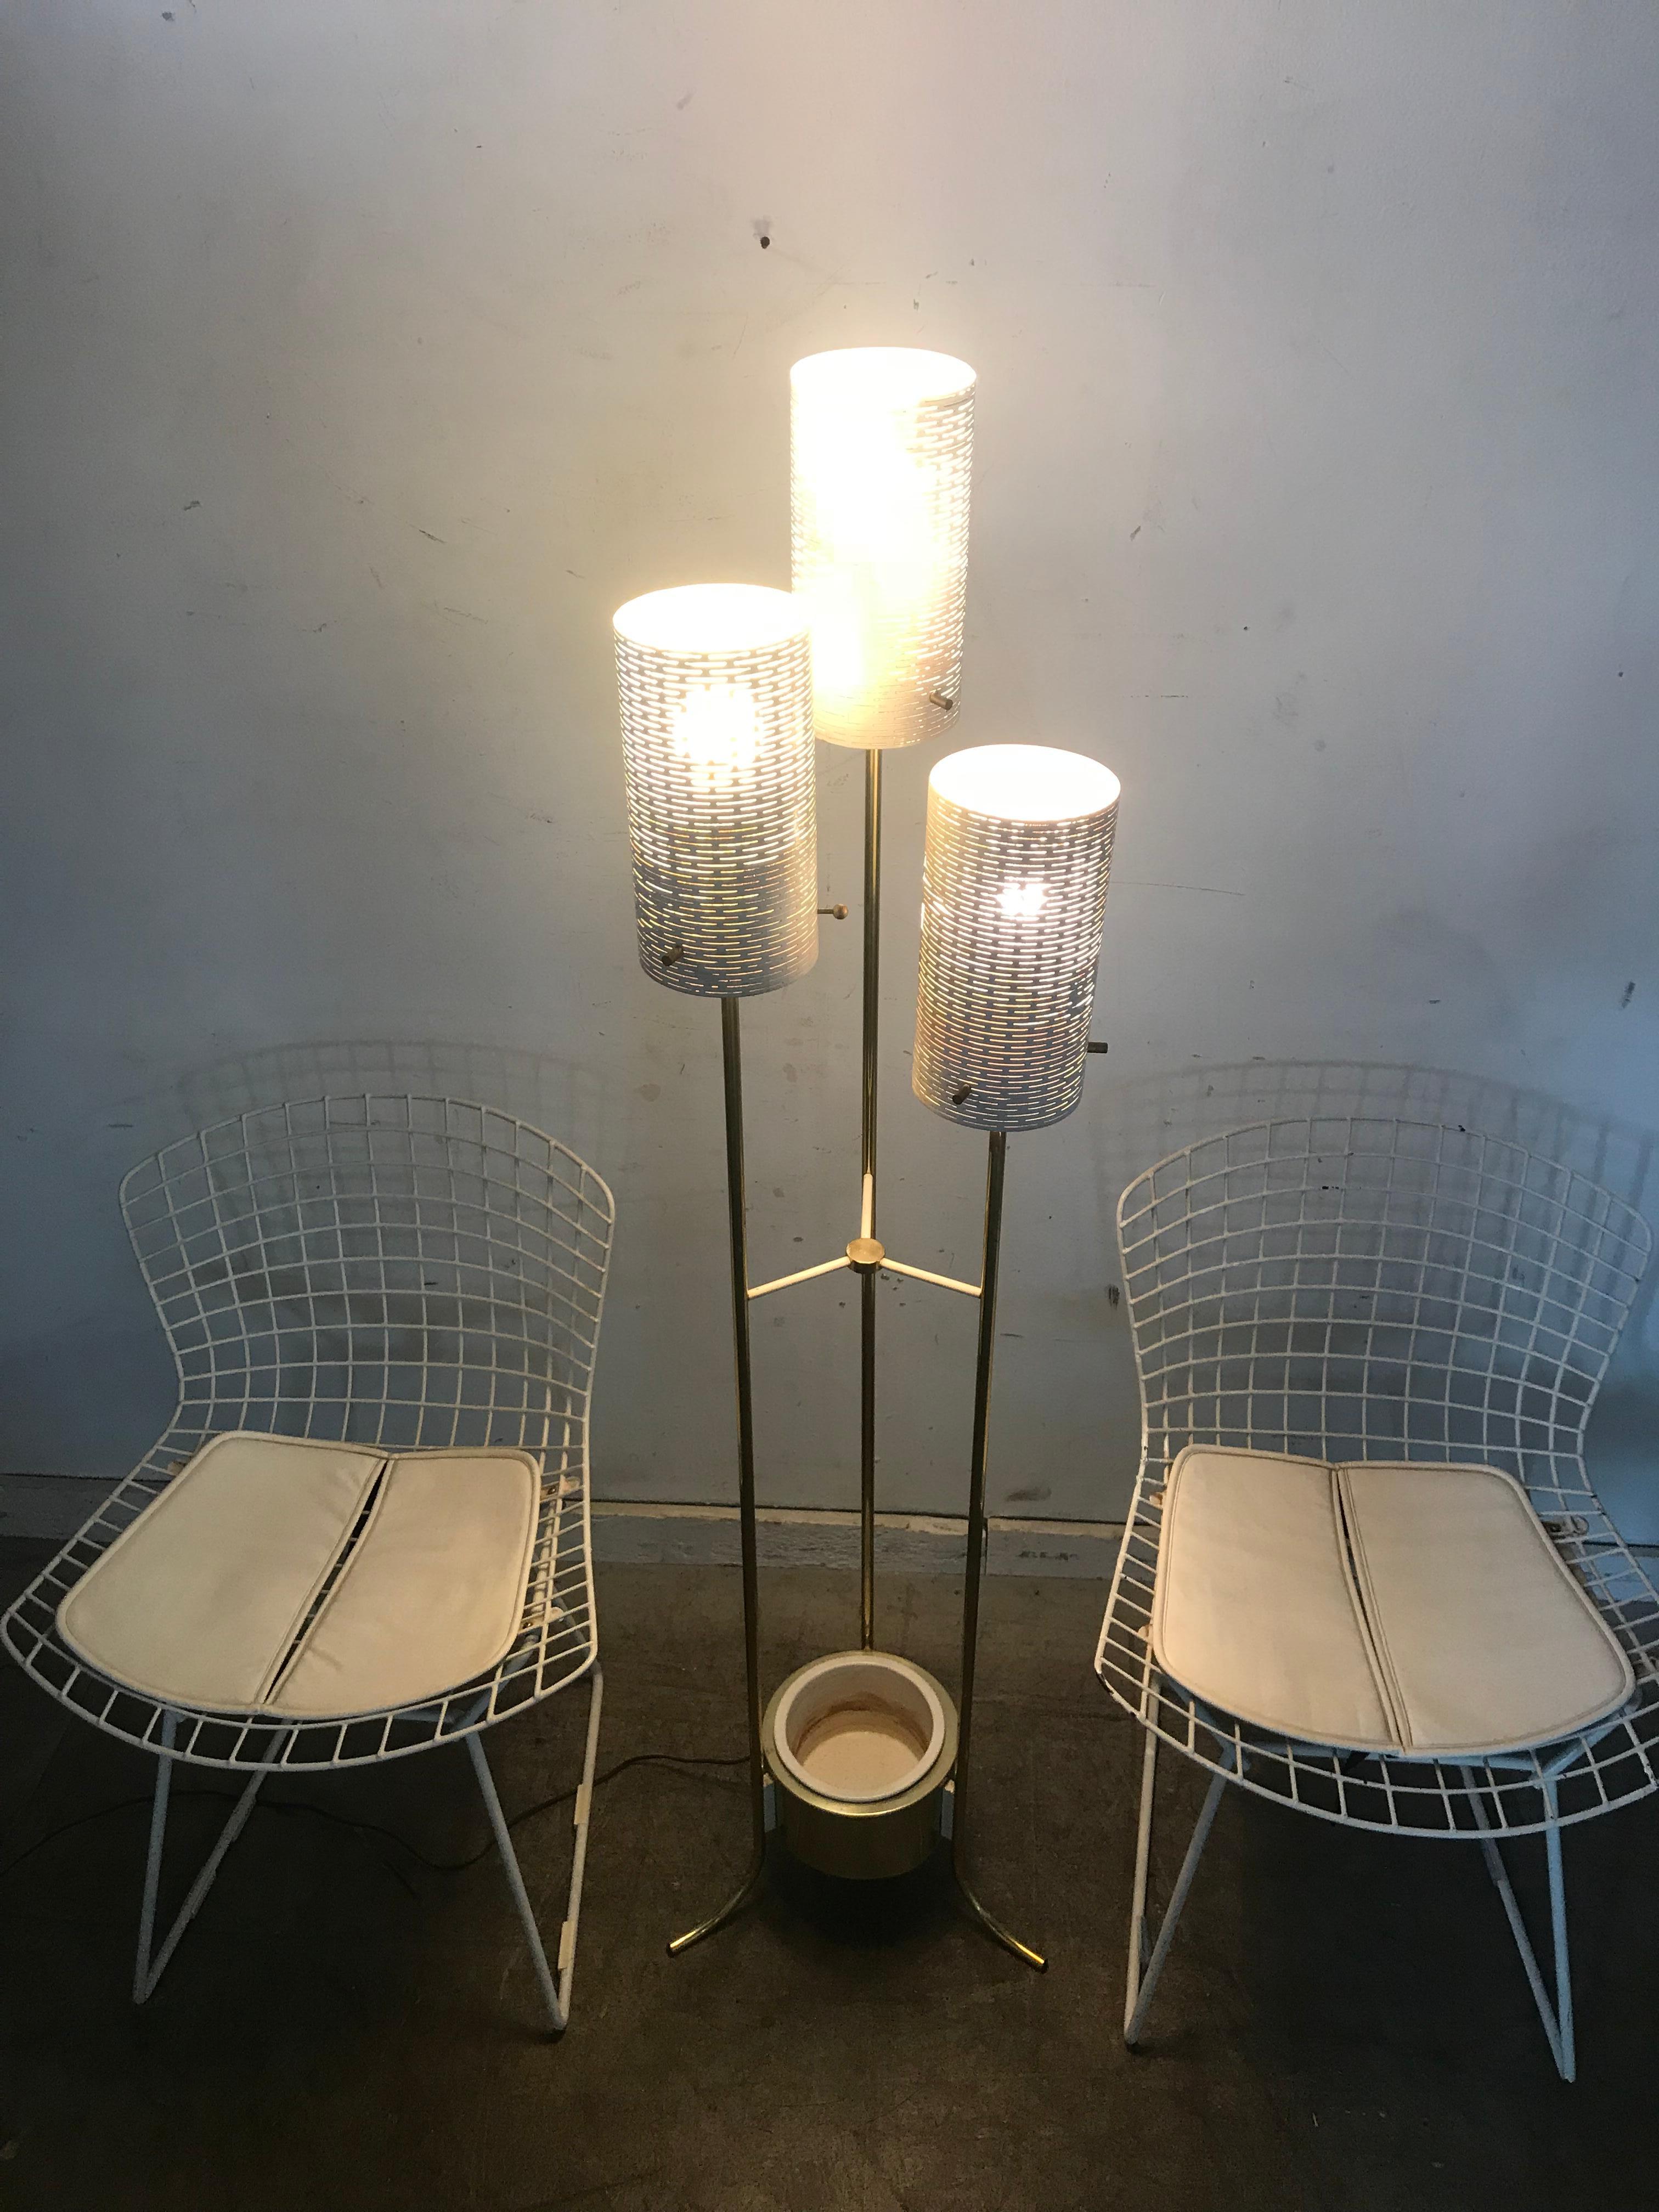 Modernist three shade brass and metal floor lamp with planter, classic Mid-Century Modern design, three perforated metal cylindrical shades, brass frame and pottery planter inset to bottom. Attributed to Stiffel Lamp Co, very reminiscent to the